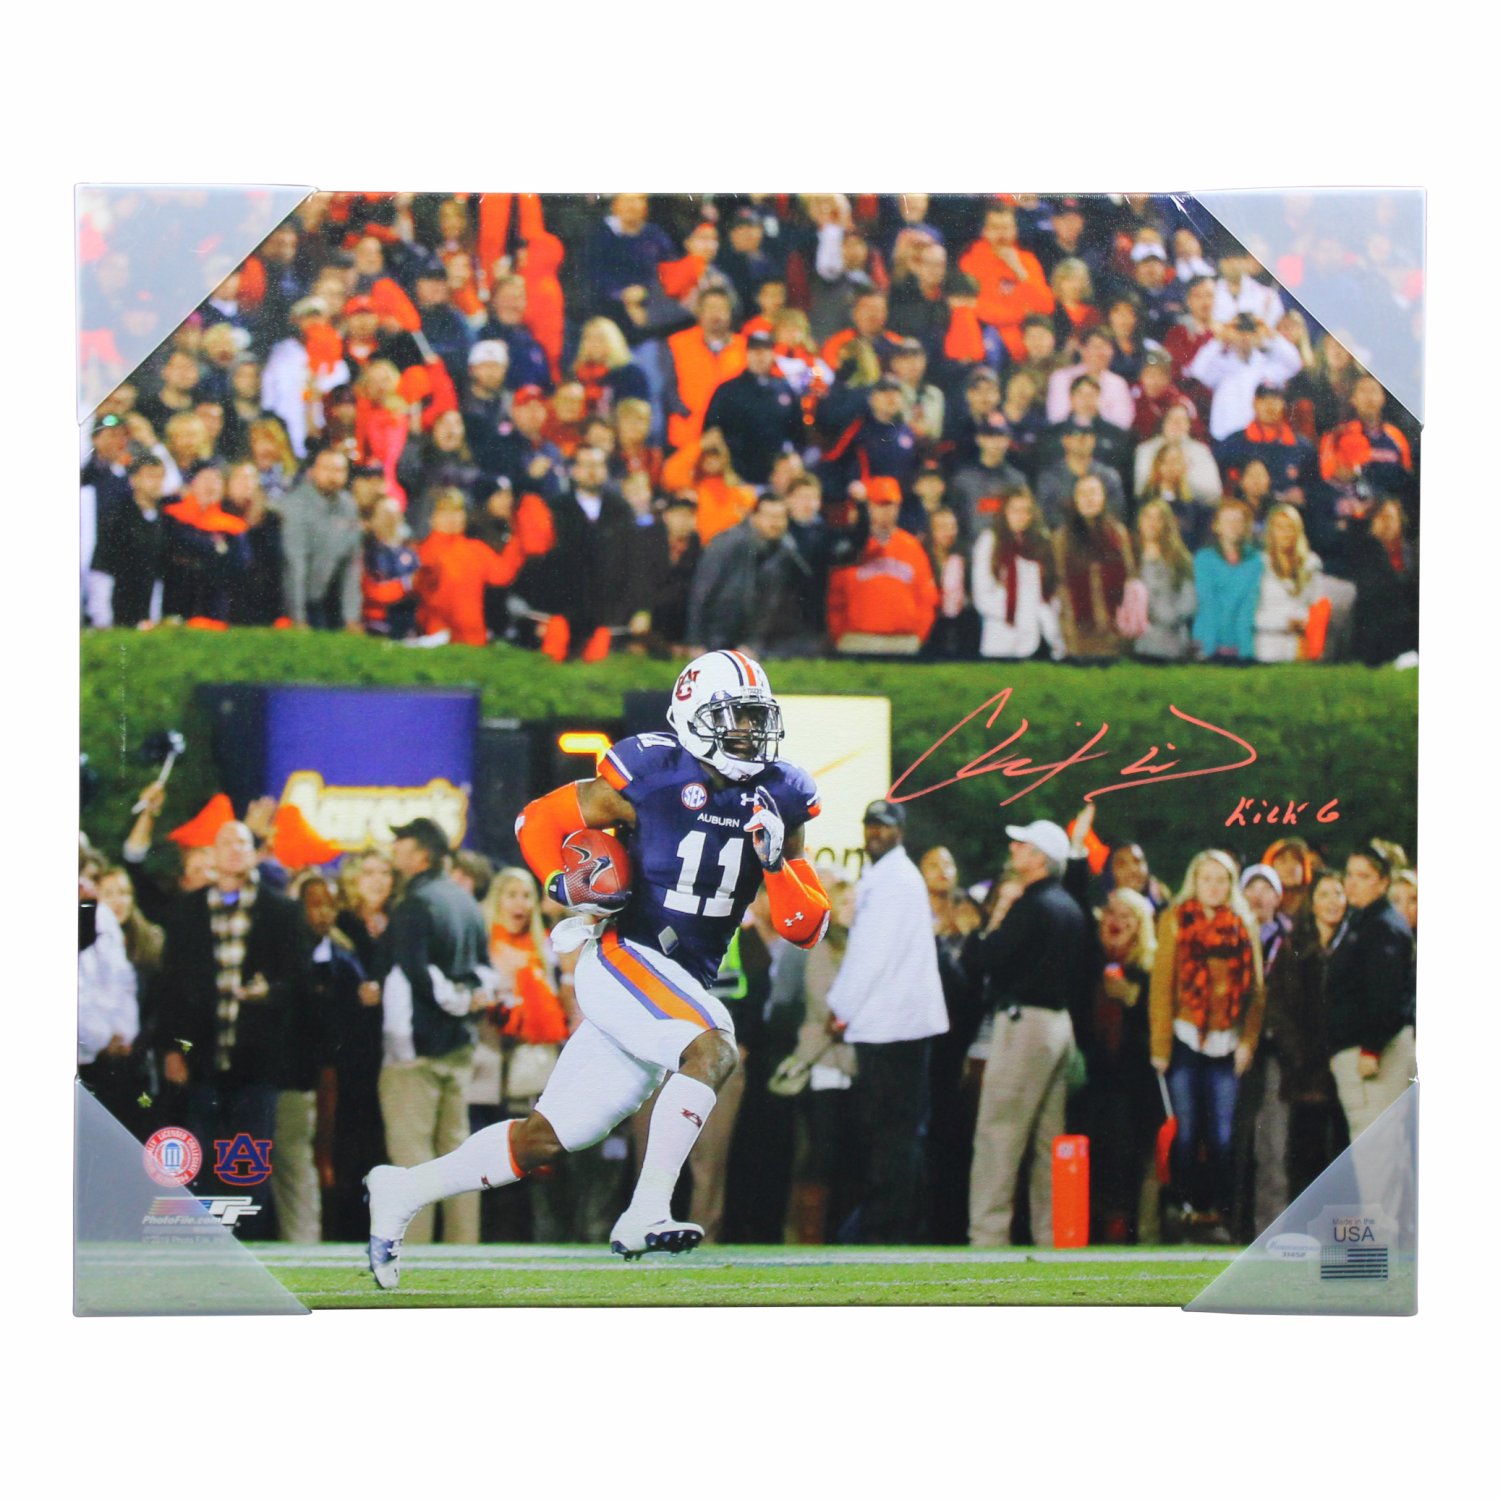 Chris Davis Autographed Auburn Tigers Stretched Kick Six vs Alabama Canvas  with Kick 6 Inscription Signed in Orange - Certified Authentic